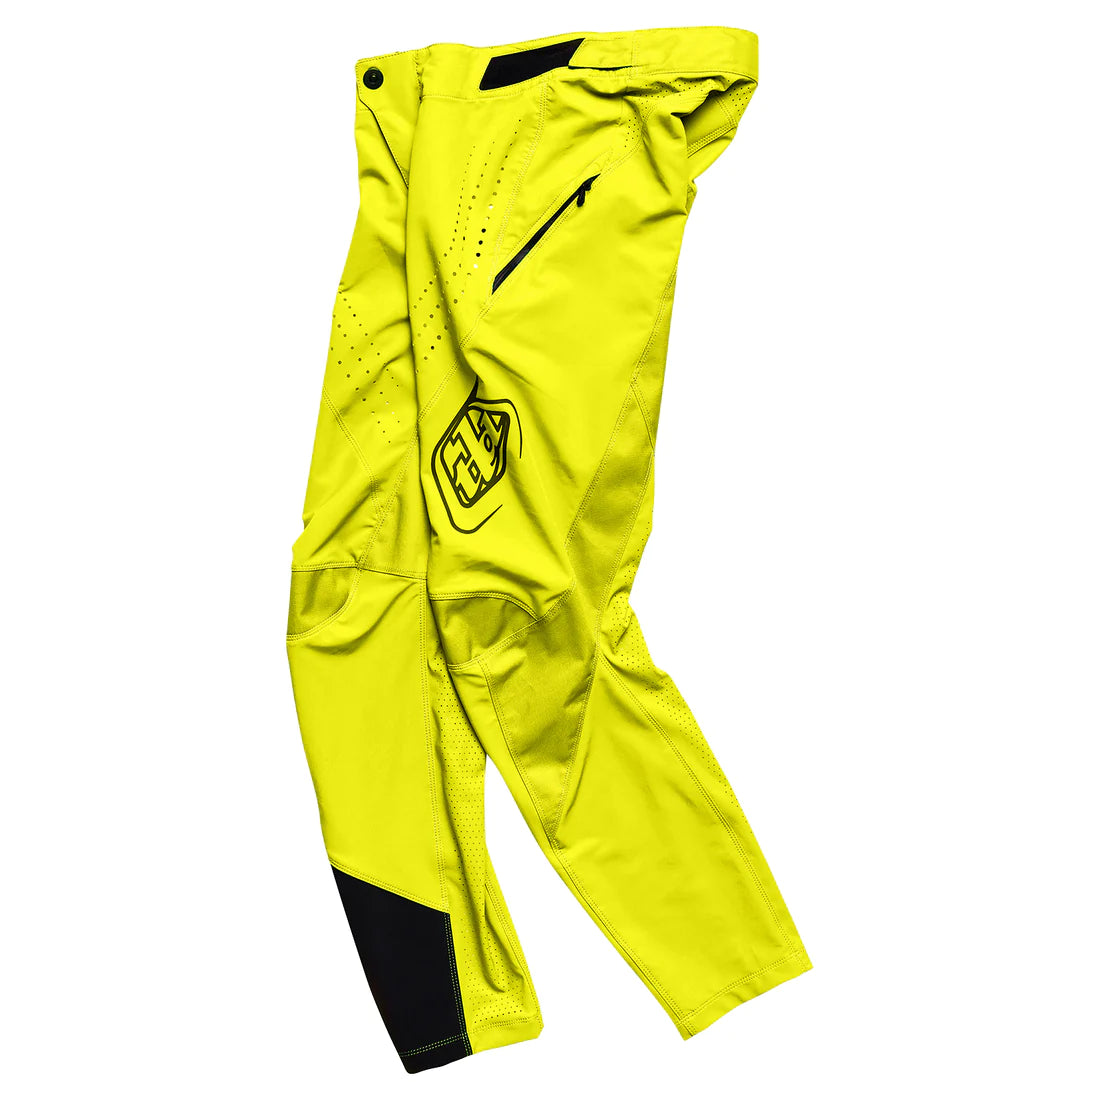 Bright yellow TLD Youth Sprint Pant Mono Flo Yellow racing pant with black detailing and a brand logo on the thigh, crafted from durable material.